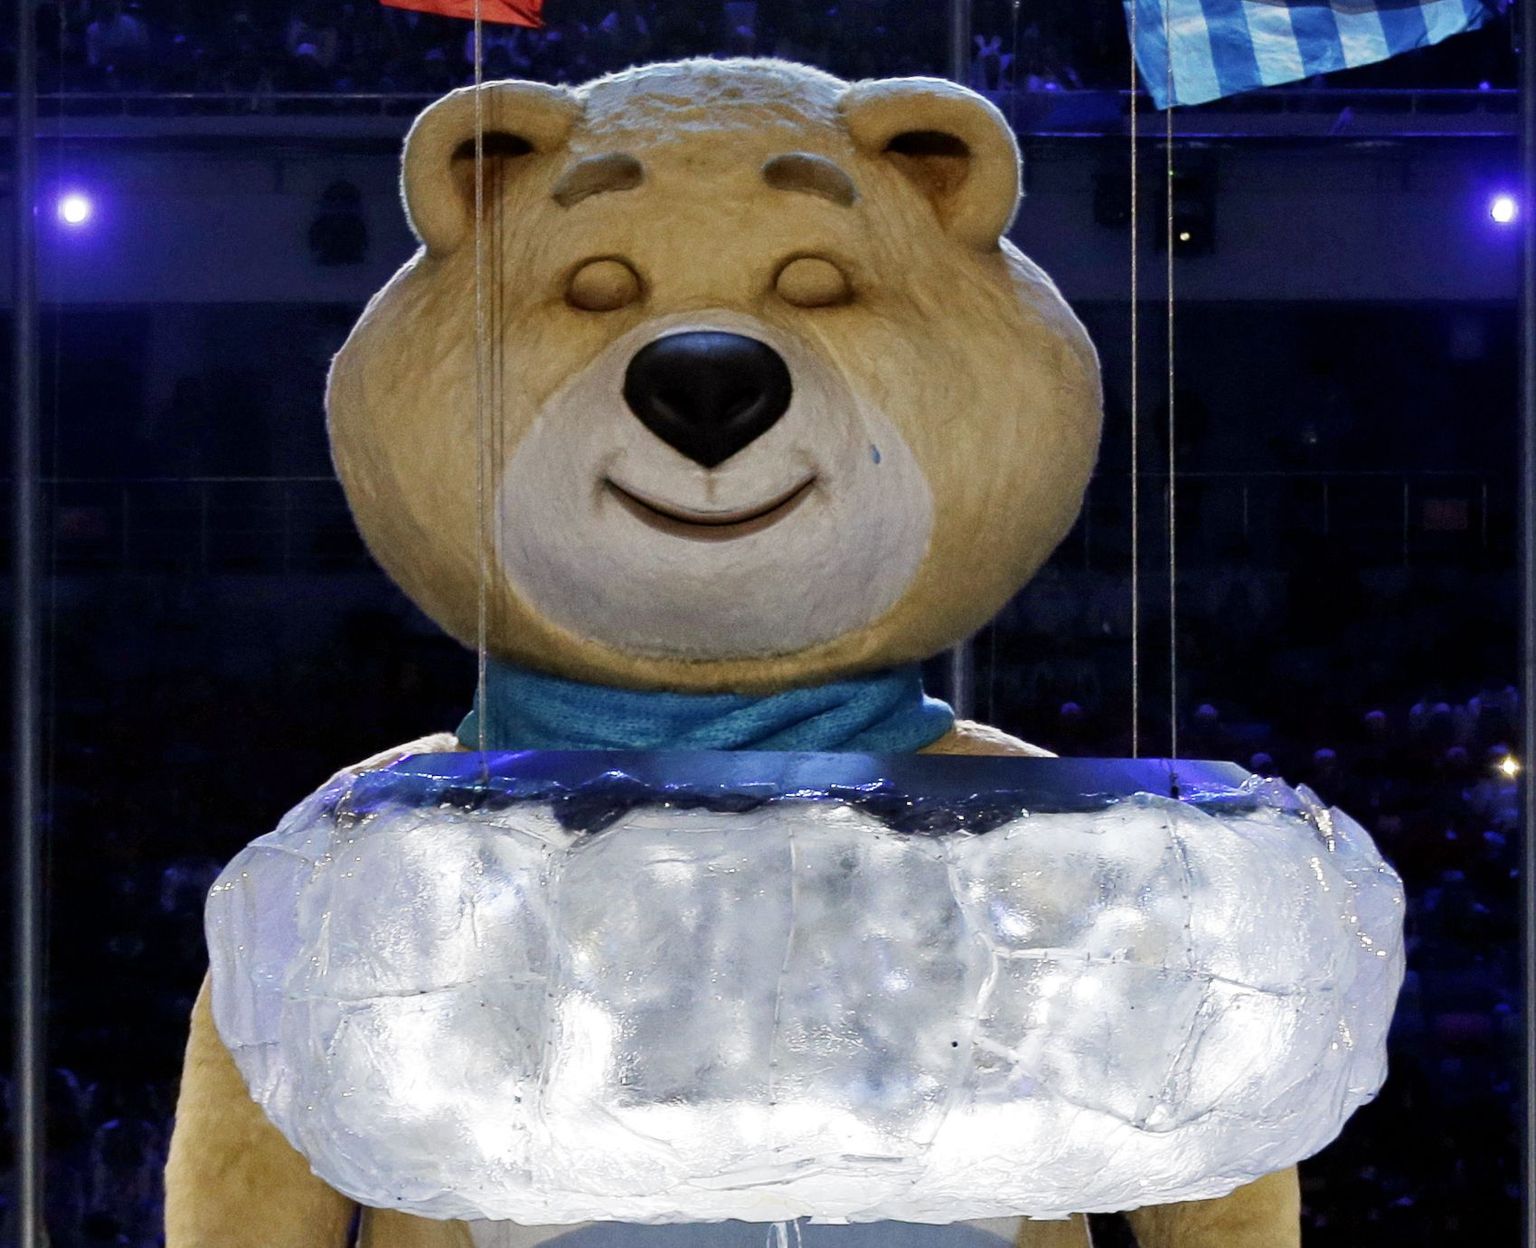 One of the Sochi Olympic mascots sheds a tear after extinguishing the Olympic flame during the closing ceremony of the 2014 Winter Olympics, Sunday, Feb. 23, 2014, in Sochi, Russia. (AP Photo/Charlie Riedel) / TT / kod 436